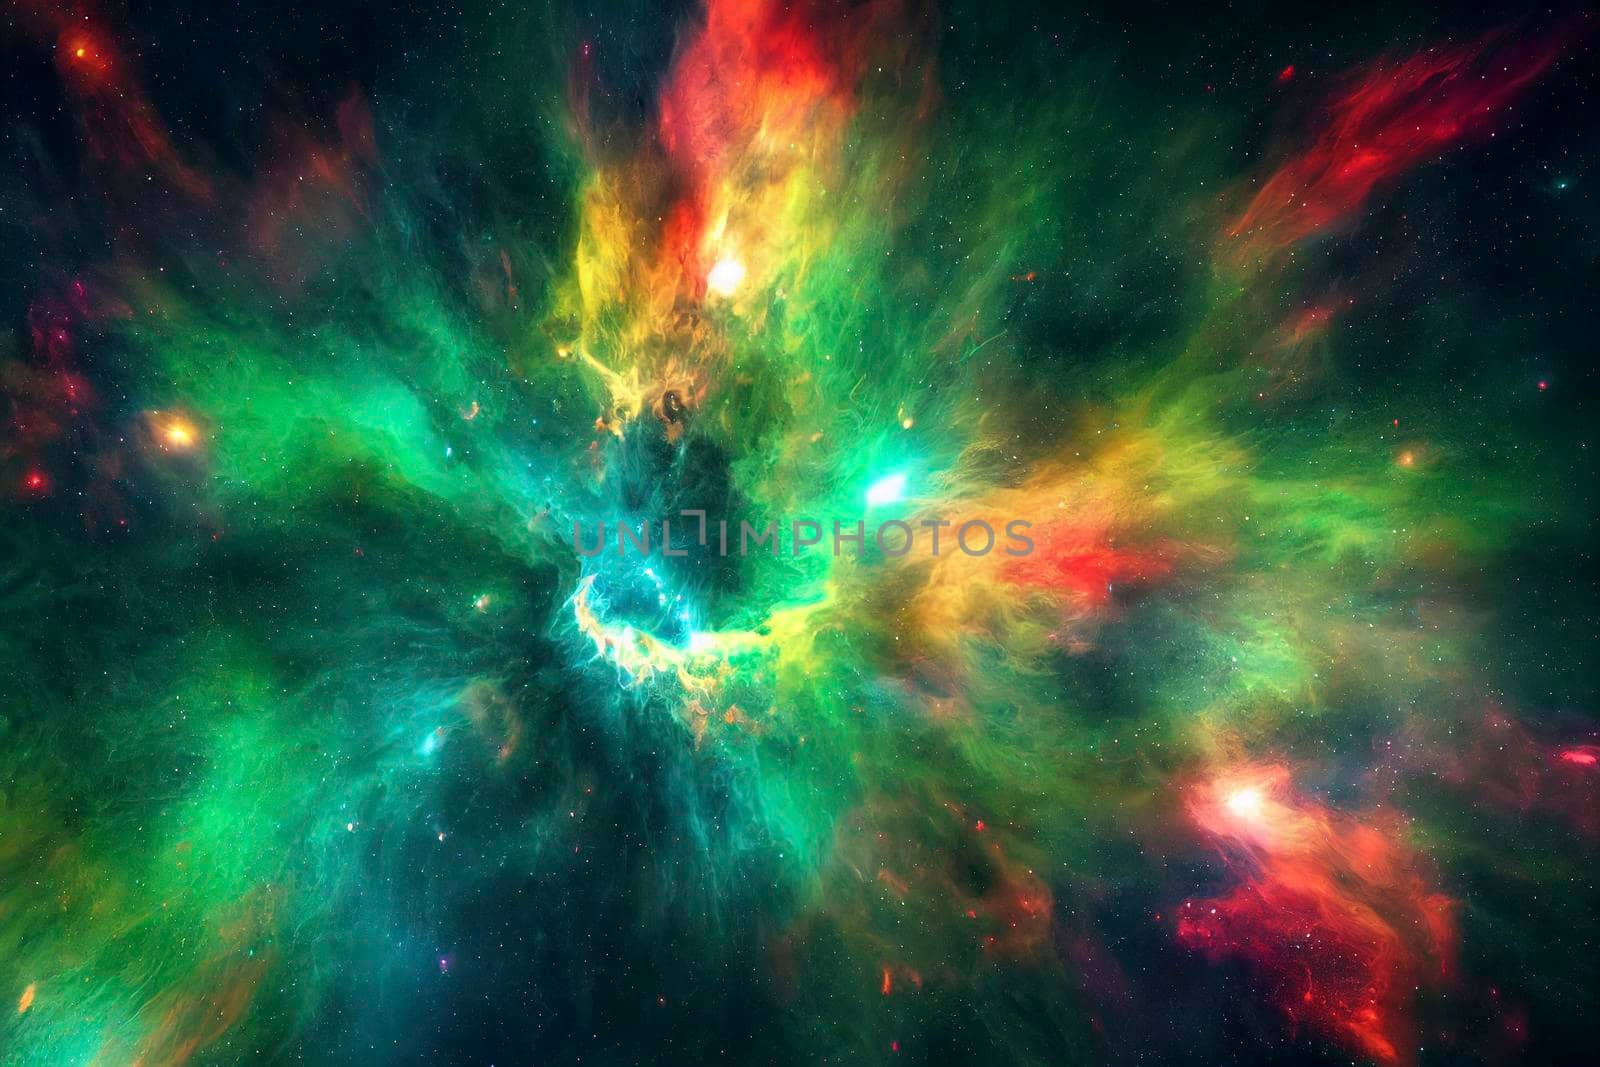 Deep space. Science fiction wallpaper, planets, stars, galaxies and nebulas in awesome cosmic image